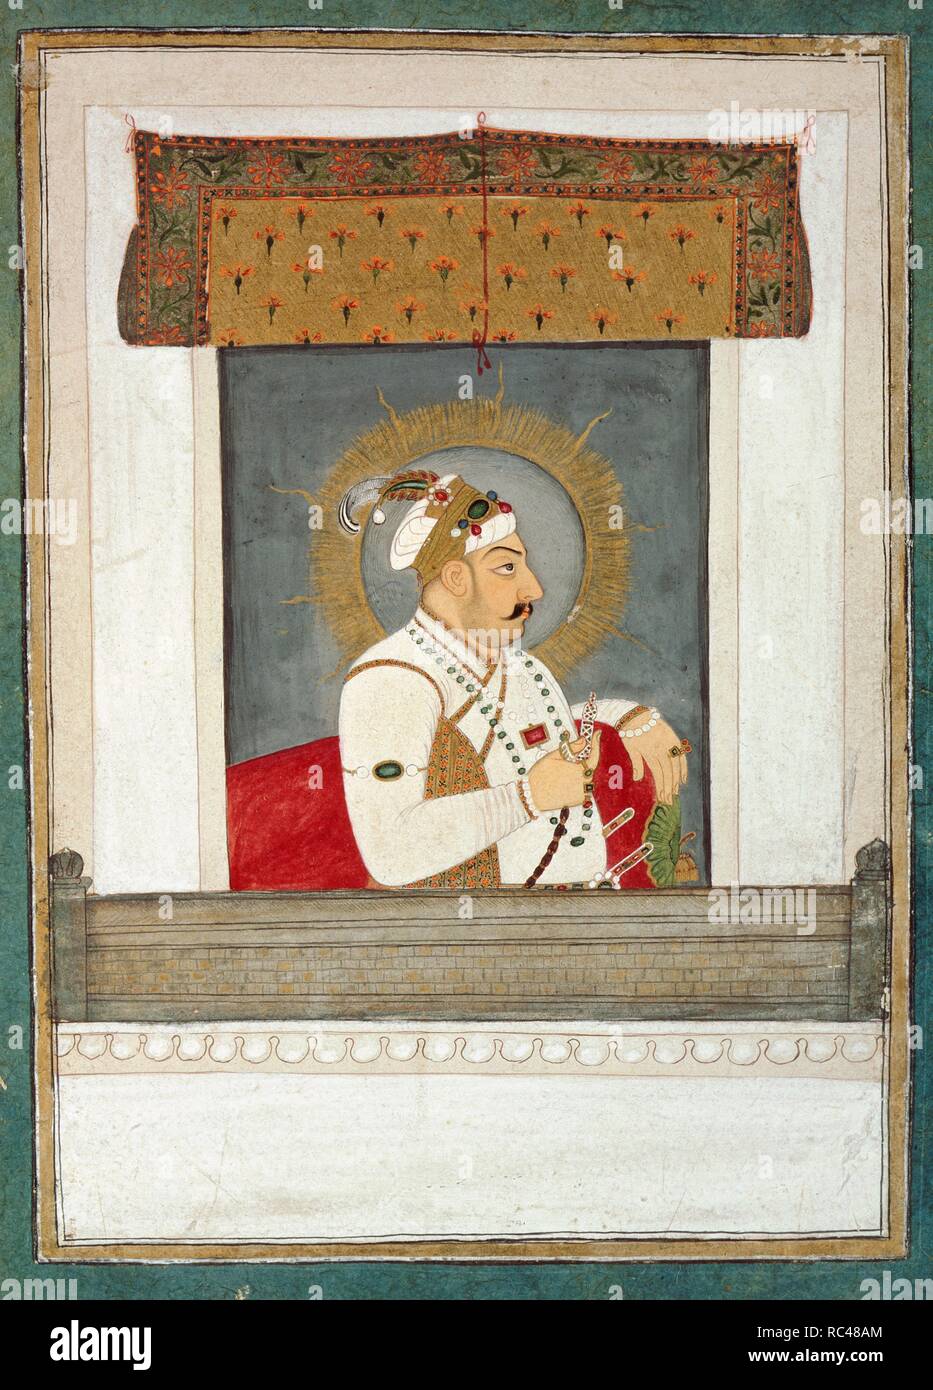 Muhammad Shah at a window. The emperor is seated facing right, wearing a white jama and turban with a radiant gold halo and holding the mouthpiece of a hookah. The background is grey with a rolled-up blind above and white marble surround to the window. 1720 - 1730. Opaque watercolour. Mughal/18th century style Gouache with gold; gold and blue borders. 168 by 118 mm; page 188 by 135 mm. Source: Add.Or.2769. Stock Photo